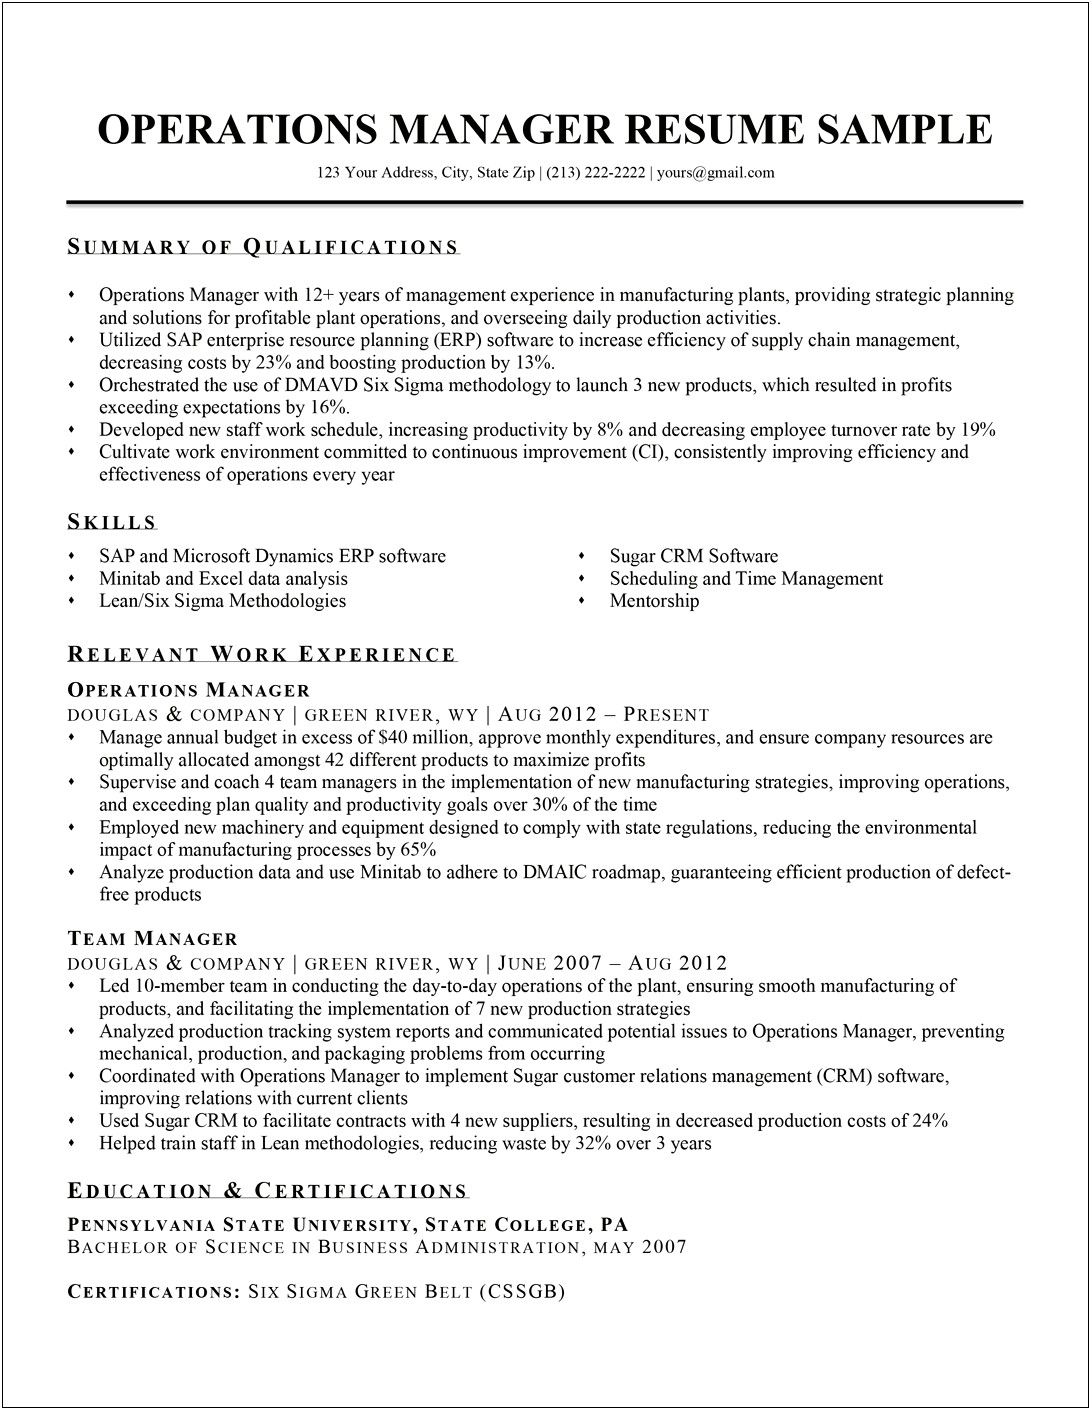 Office Manager Roles And Responsibilities Resume